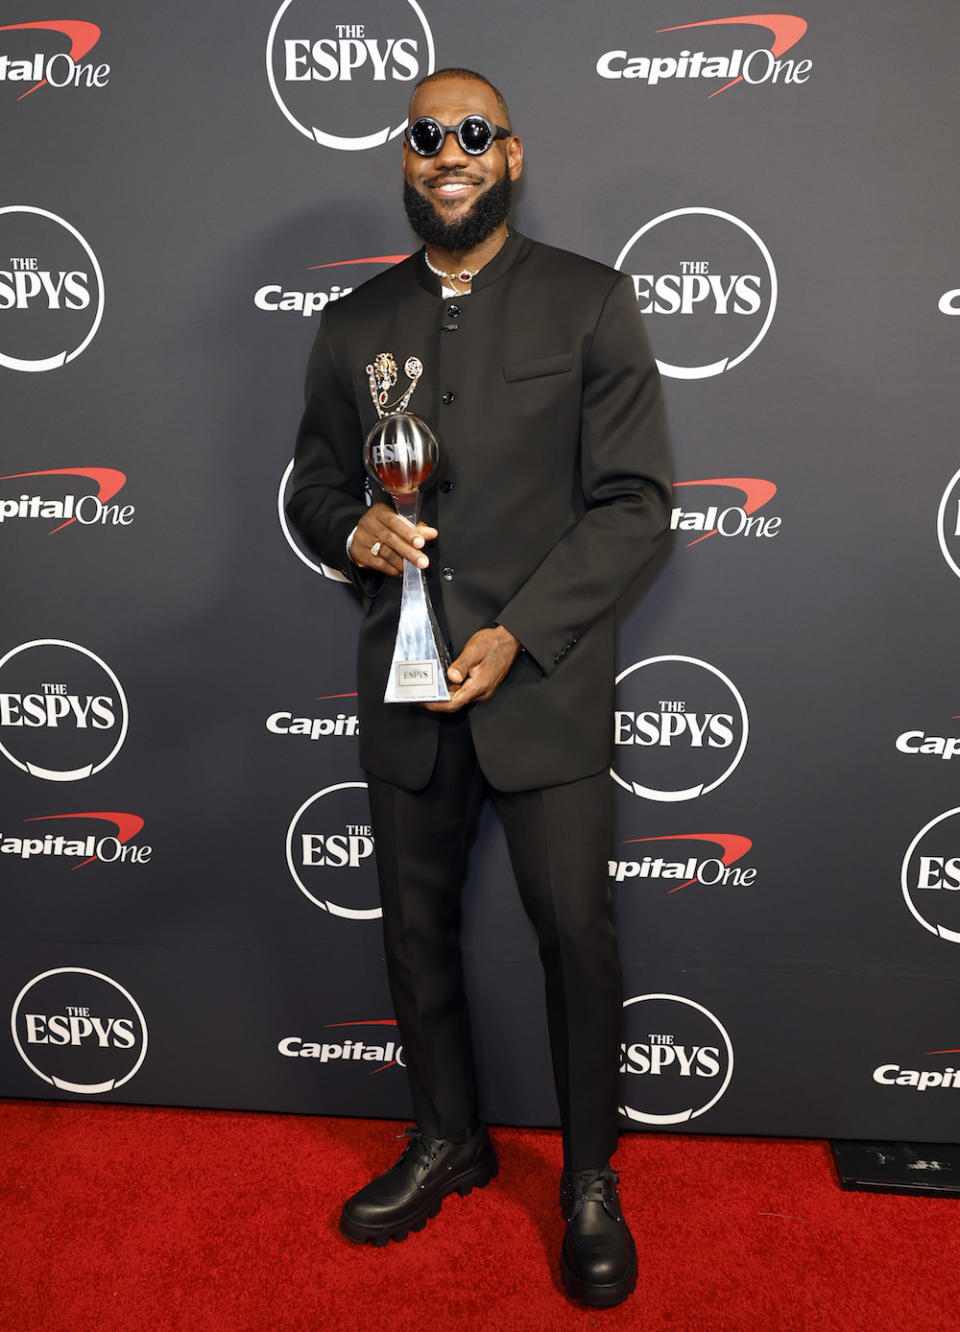 HOLLYWOOD, CALIFORNIA - JULY 12: LeBron James, winner of Best Record-Breaking Performance, attends The 2023 ESPY Awards at Dolby Theatre on July 12, 2023 in Hollywood, California. (Photo by Frazer Harrison/Getty Images)